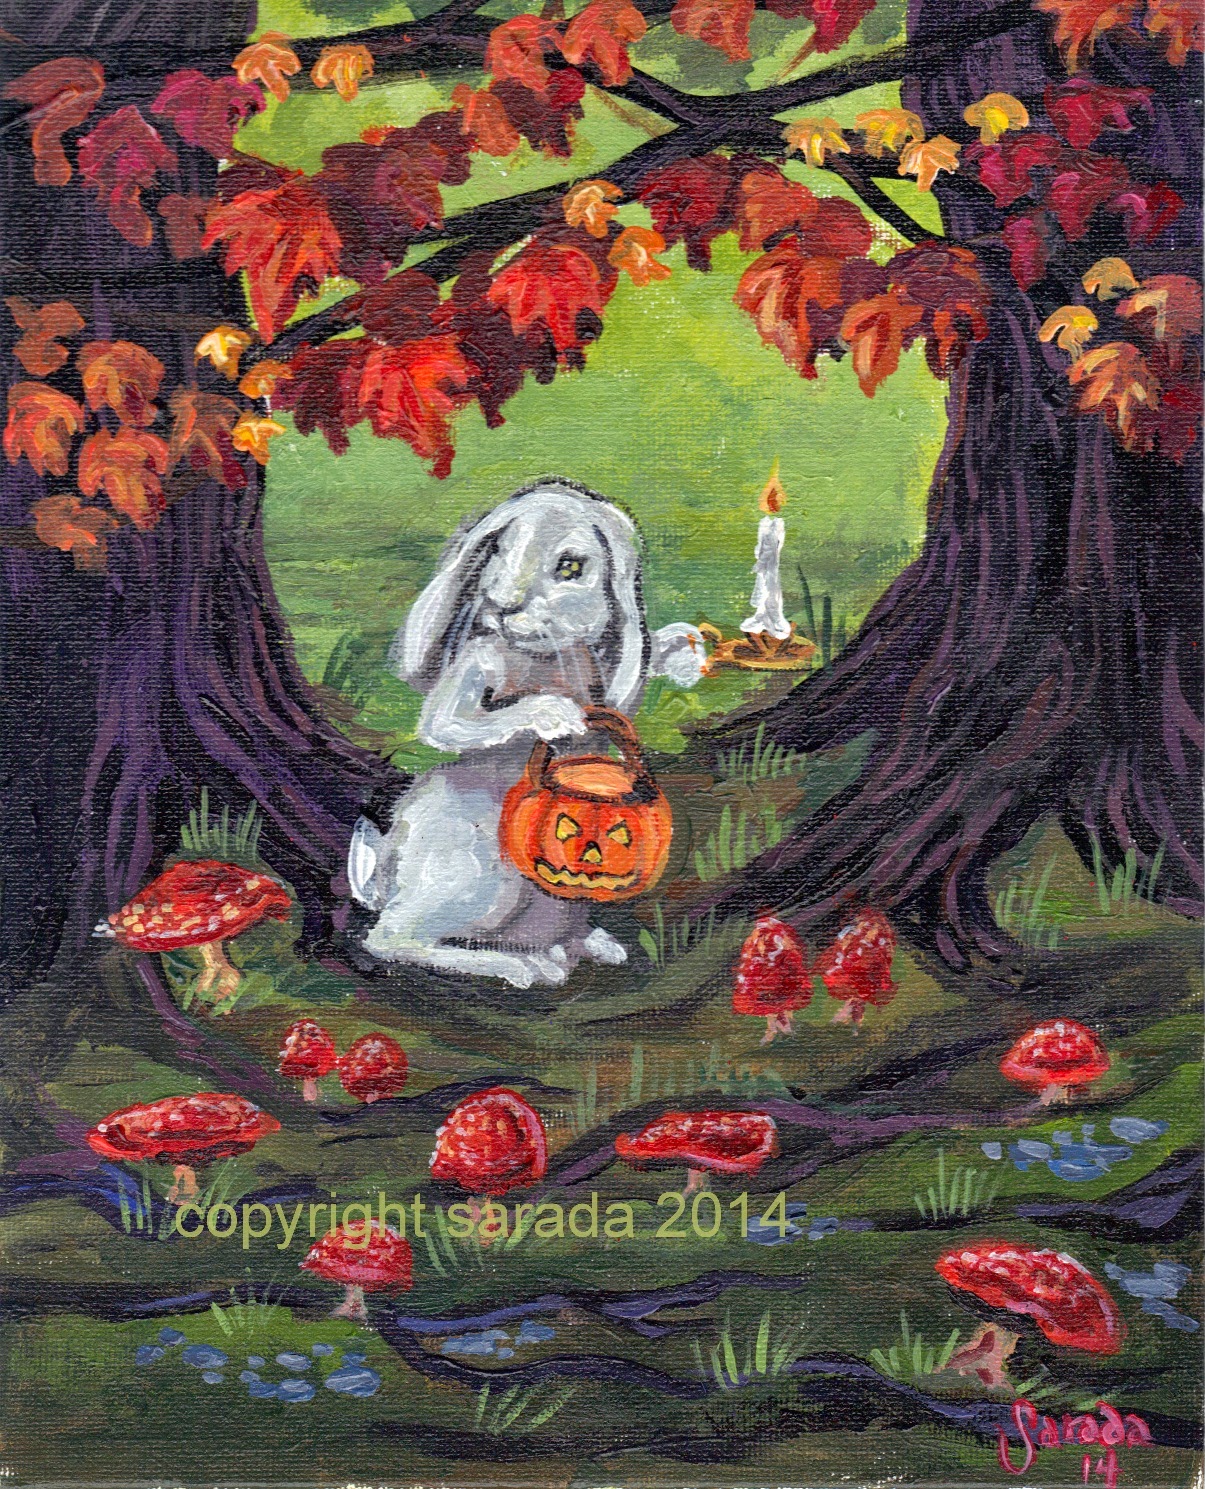 https://www.etsy.com/listing/199587105/halloween-gothic-storybook-art-print?ref=shop_home_active_4